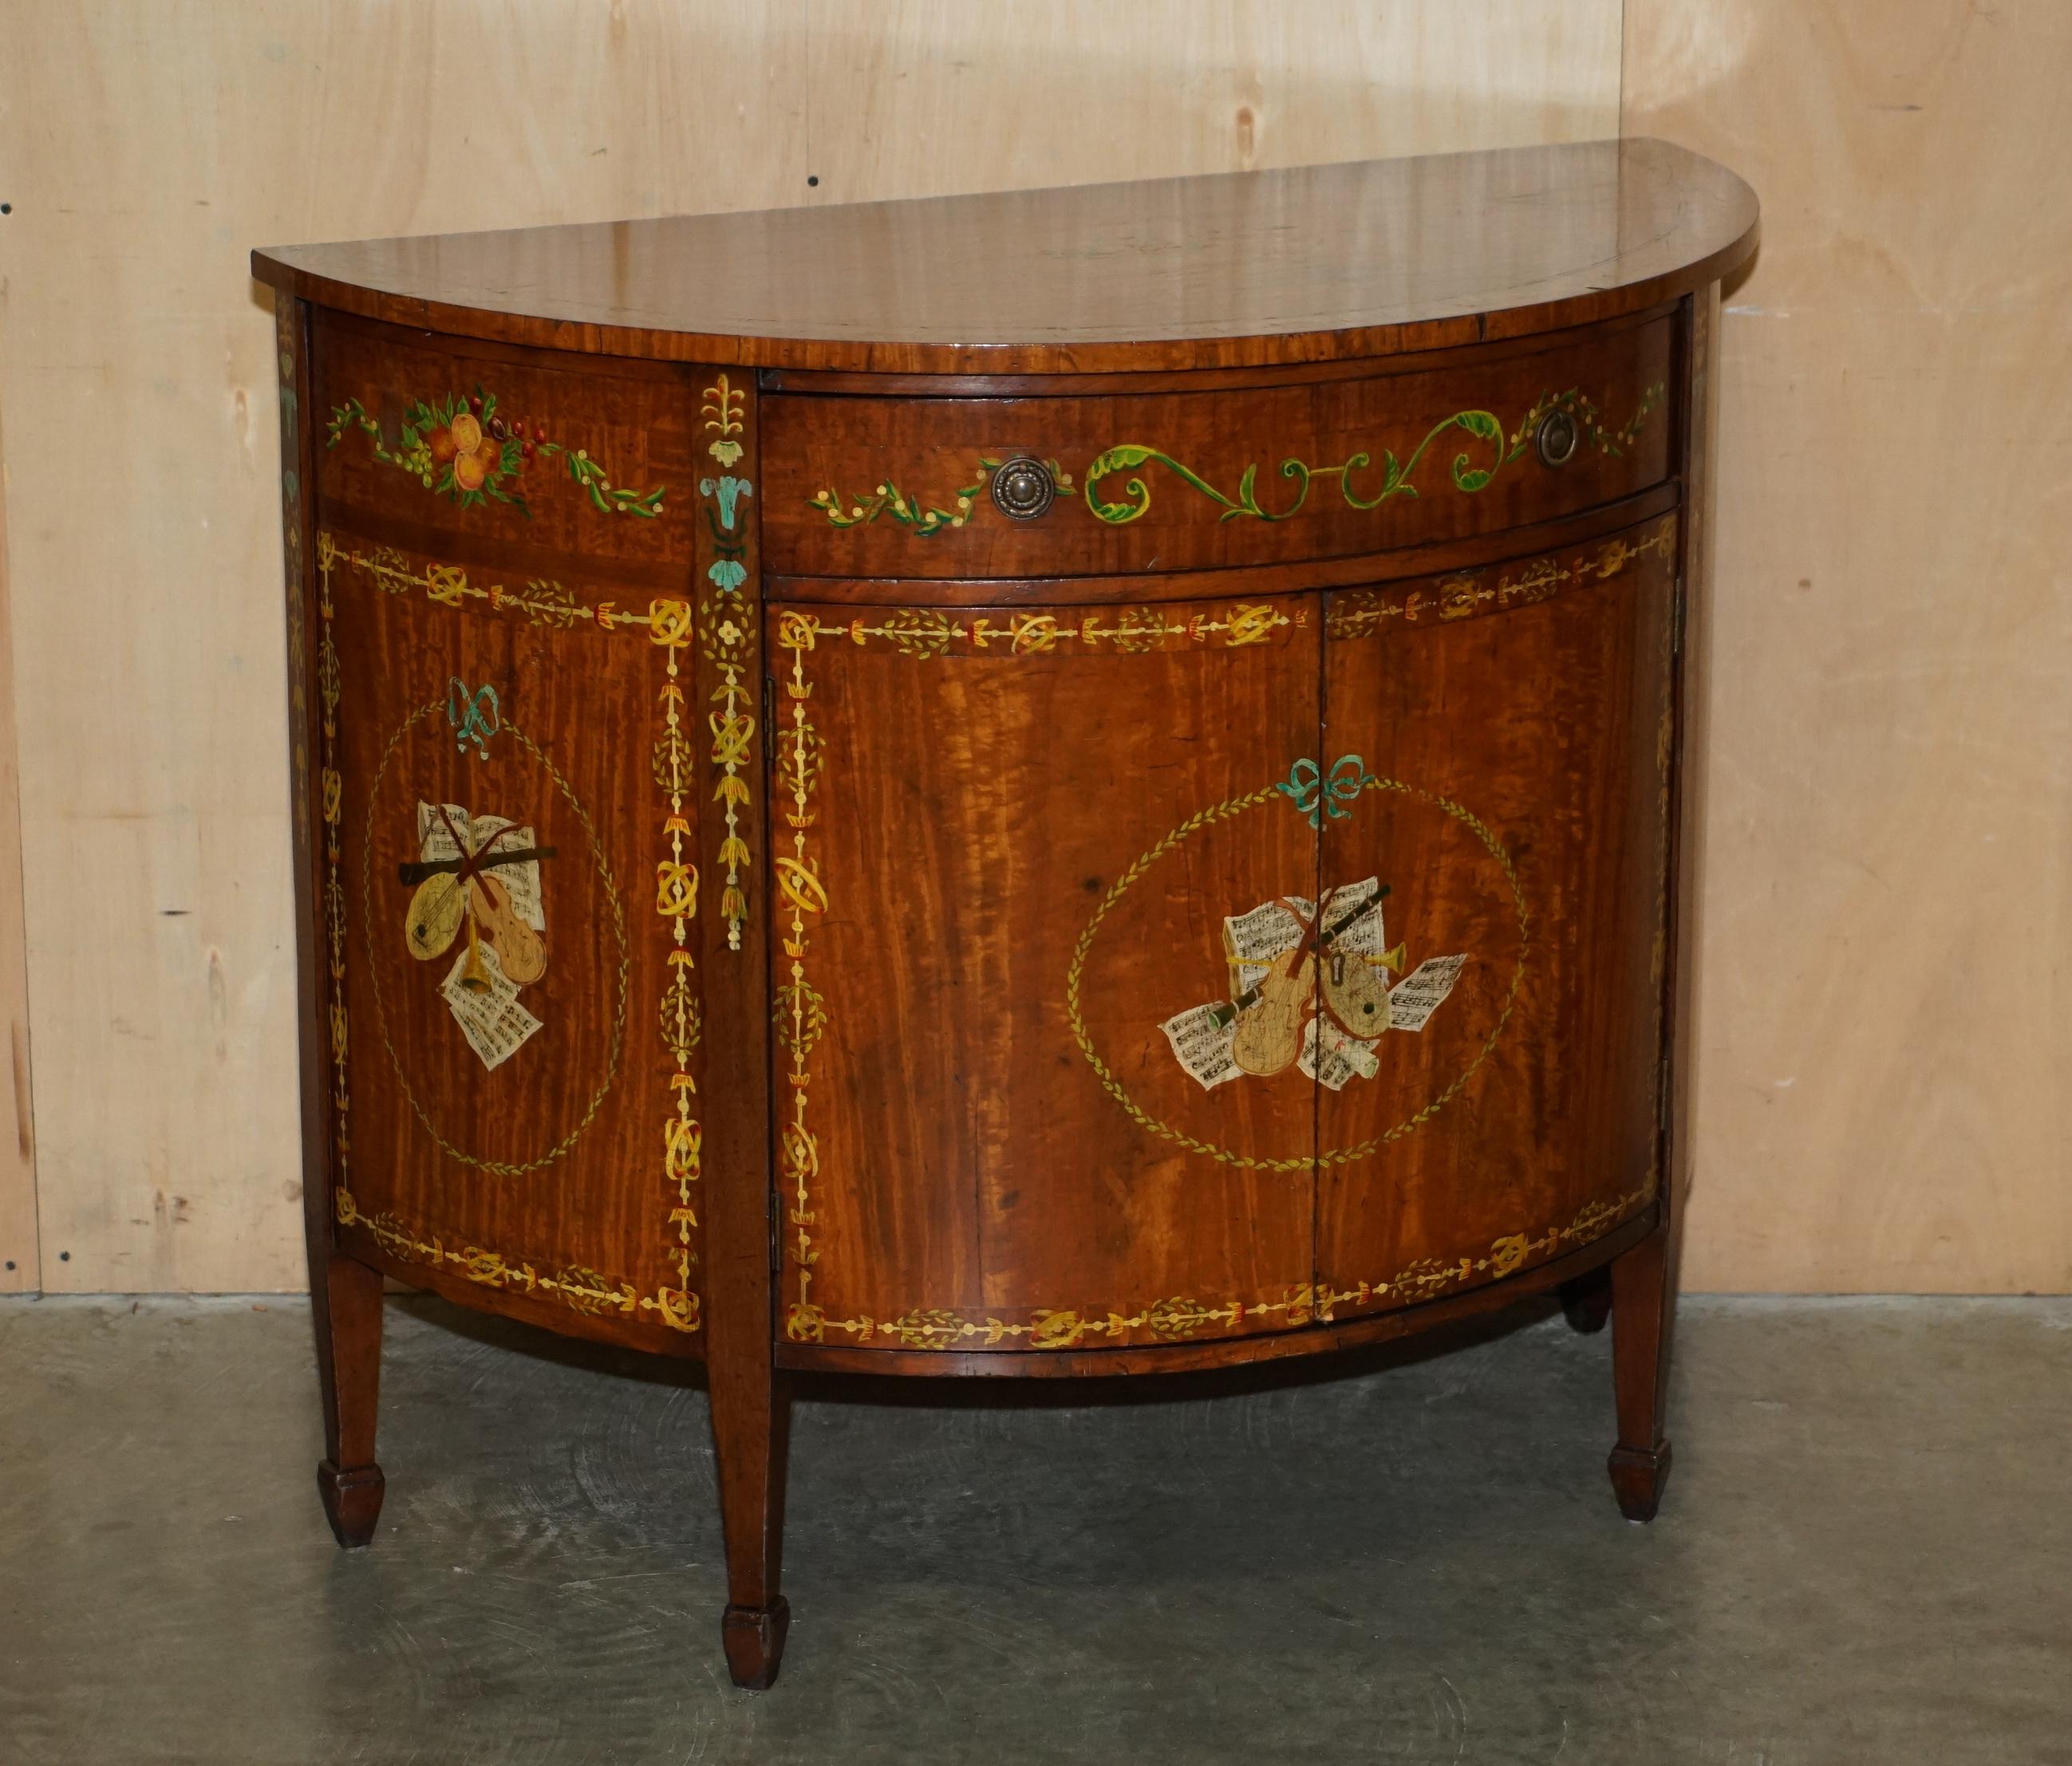 Royal House Antiques

Royal House Antiques is delighted to offer for sale this exquisite pair of hand made in England Demi Lune sideboards with Adams Sheraton Revival style paintings 

Please note the delivery fee listed is just a guide, it covers